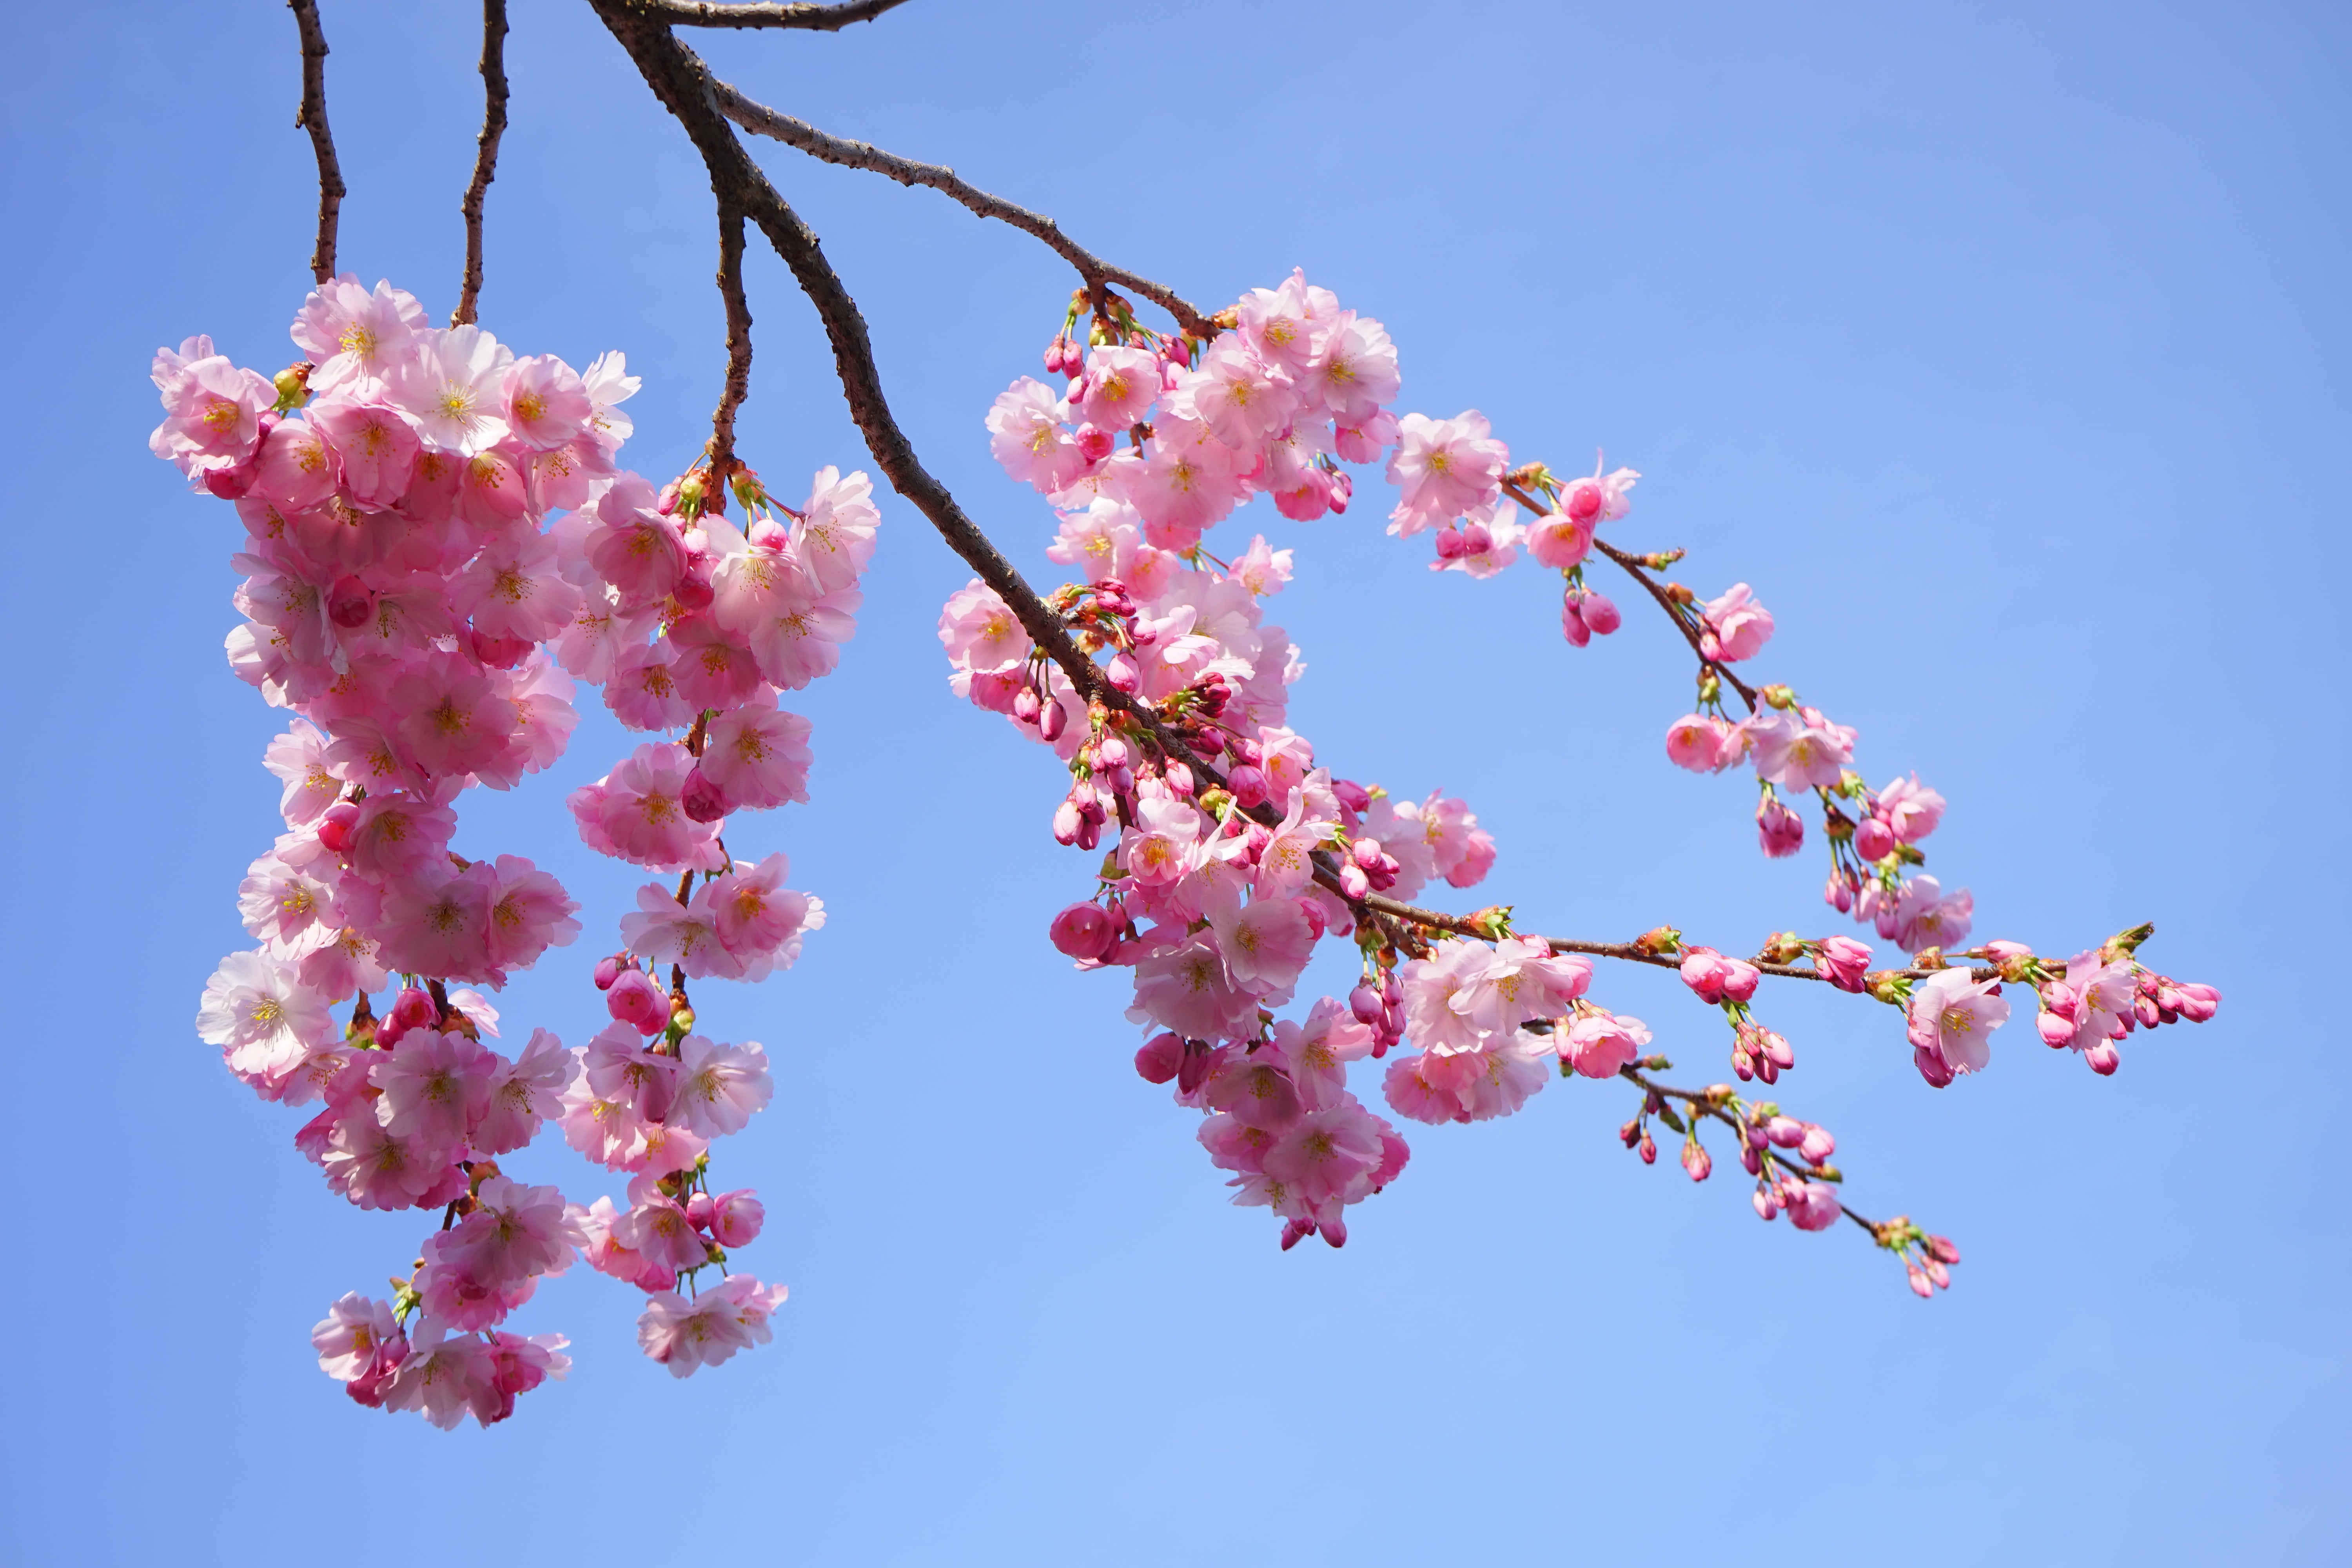 low angle photography of cherry blossom, japanese cherry trees